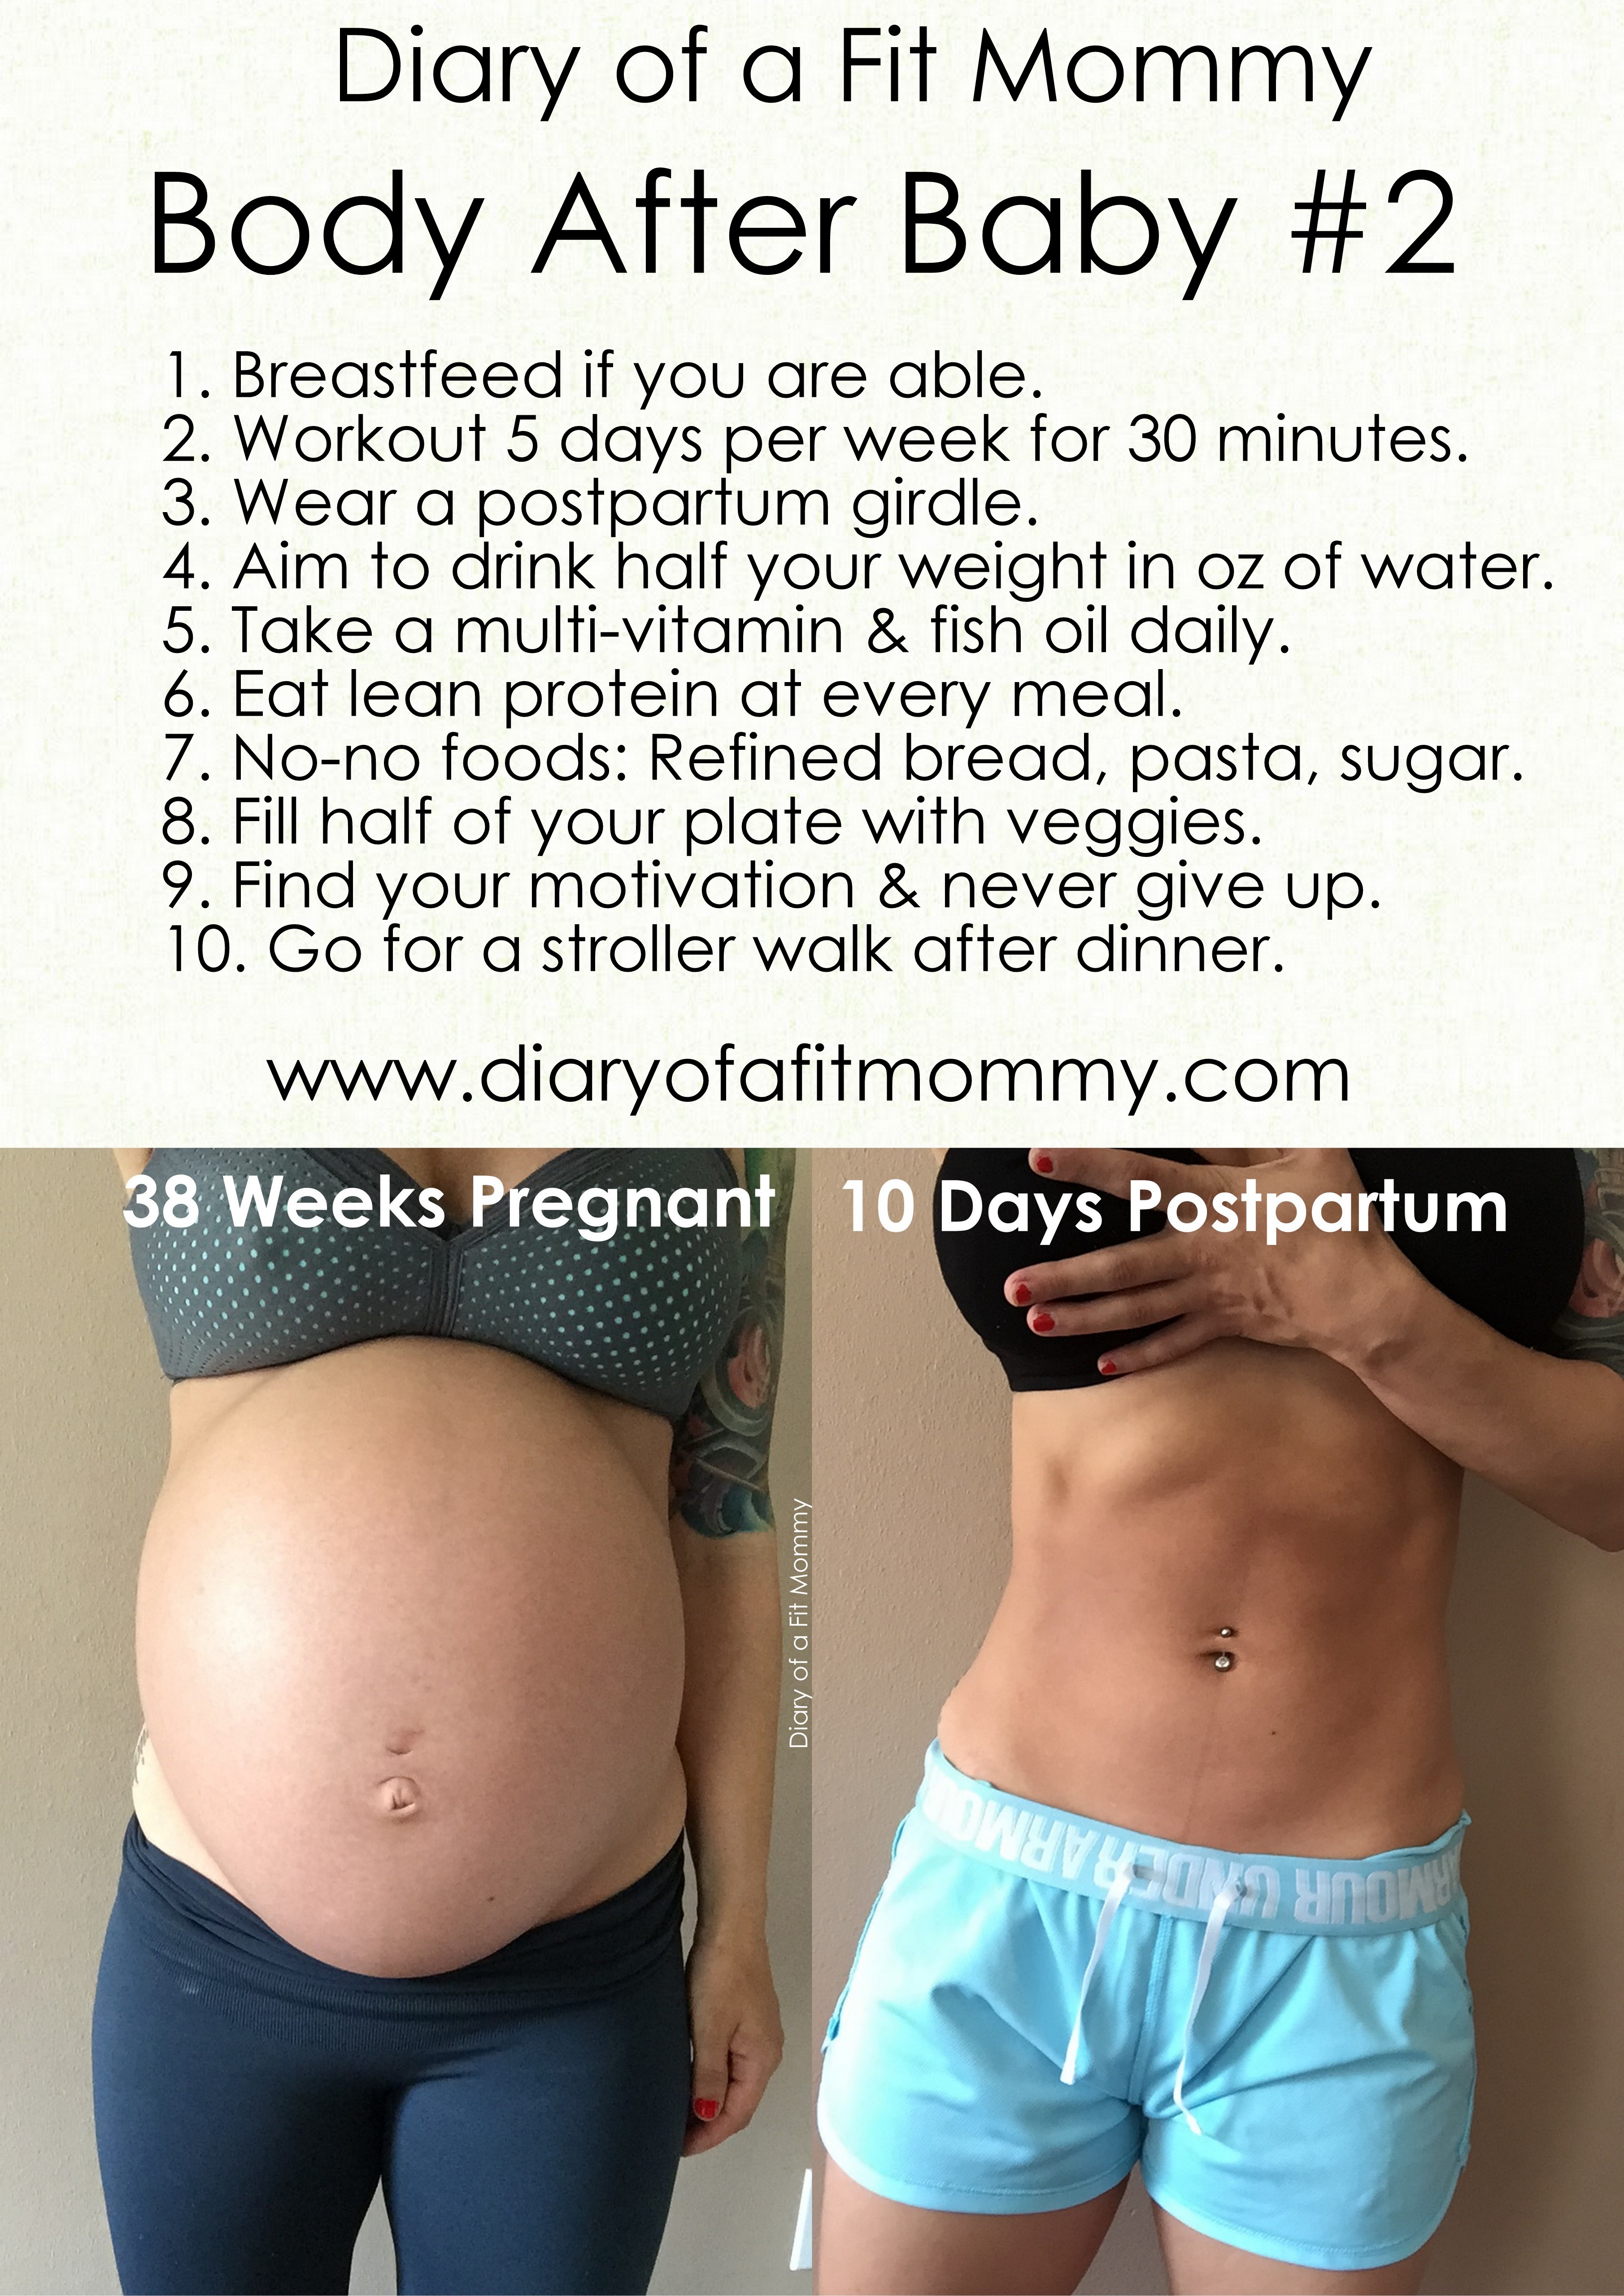 How I Got My Body Back After Baby #2 - Diary of a Fit Mommy